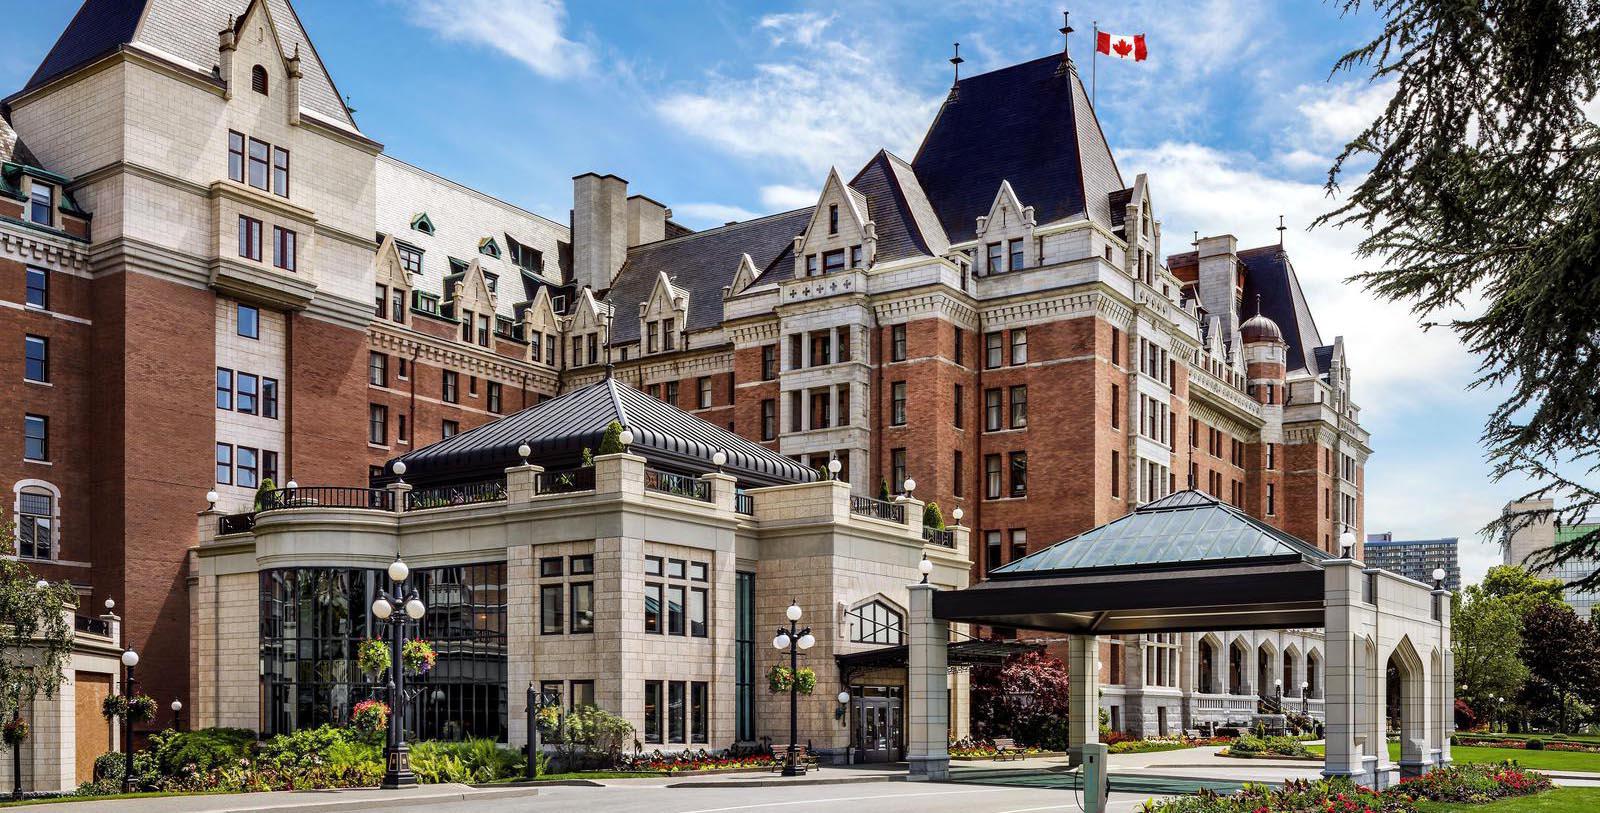 Image of hotel exterior Fairmont Empress, 1908, Member of Historic Hotels Worldwide, in Victoria, British Columbia, Canada, Overview Video